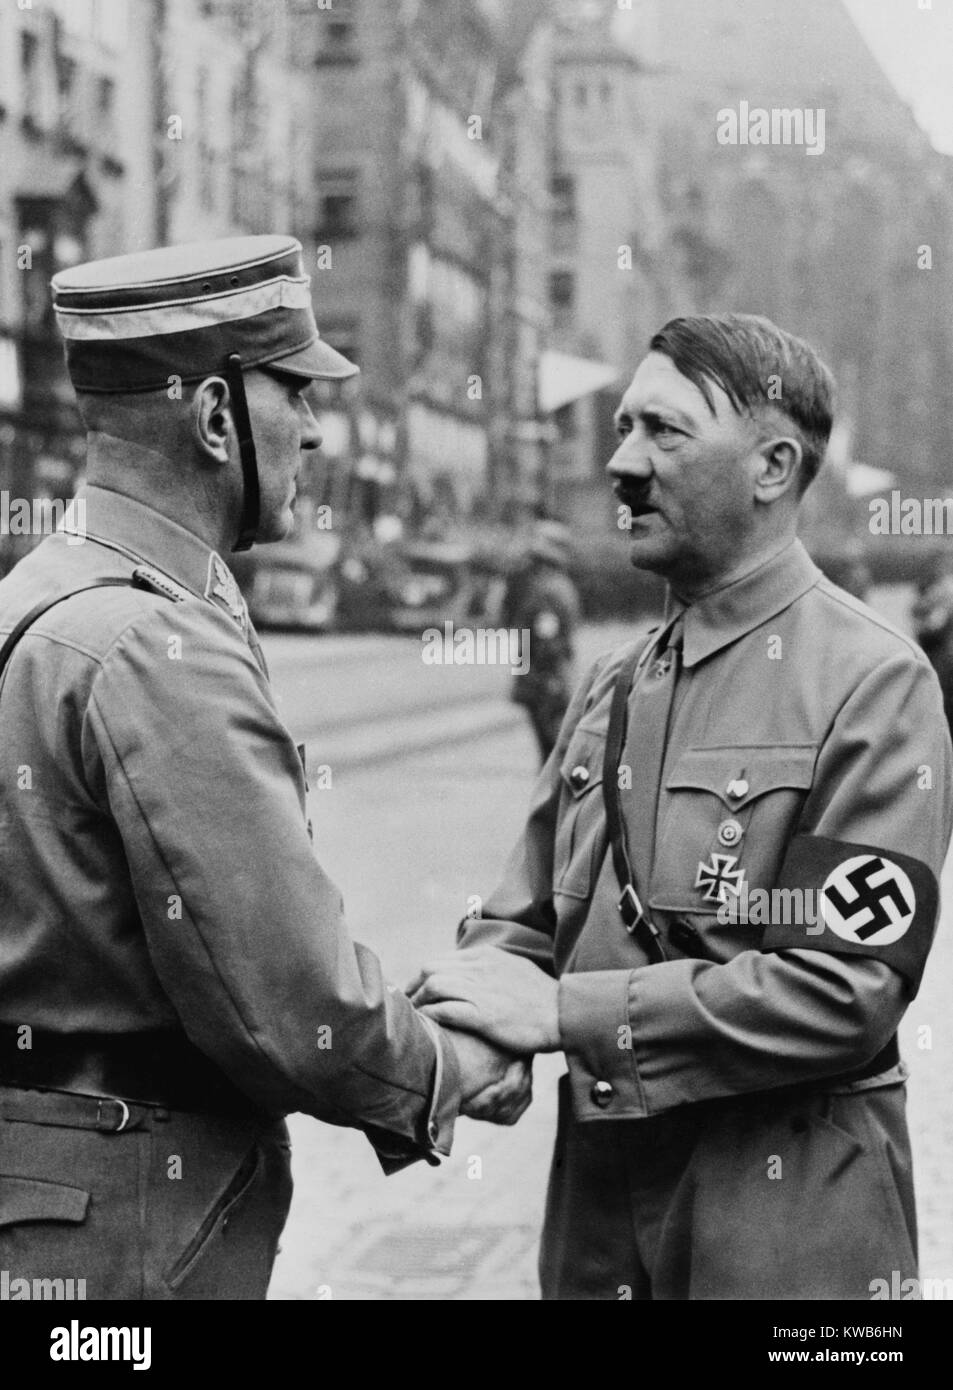 German Chancellor, Adolf Hitler, shaking hands with a Brownshirt at Nazi Party Day. Nuremberg, 1937. (BSLOC 2014 8 166) Stock Photo